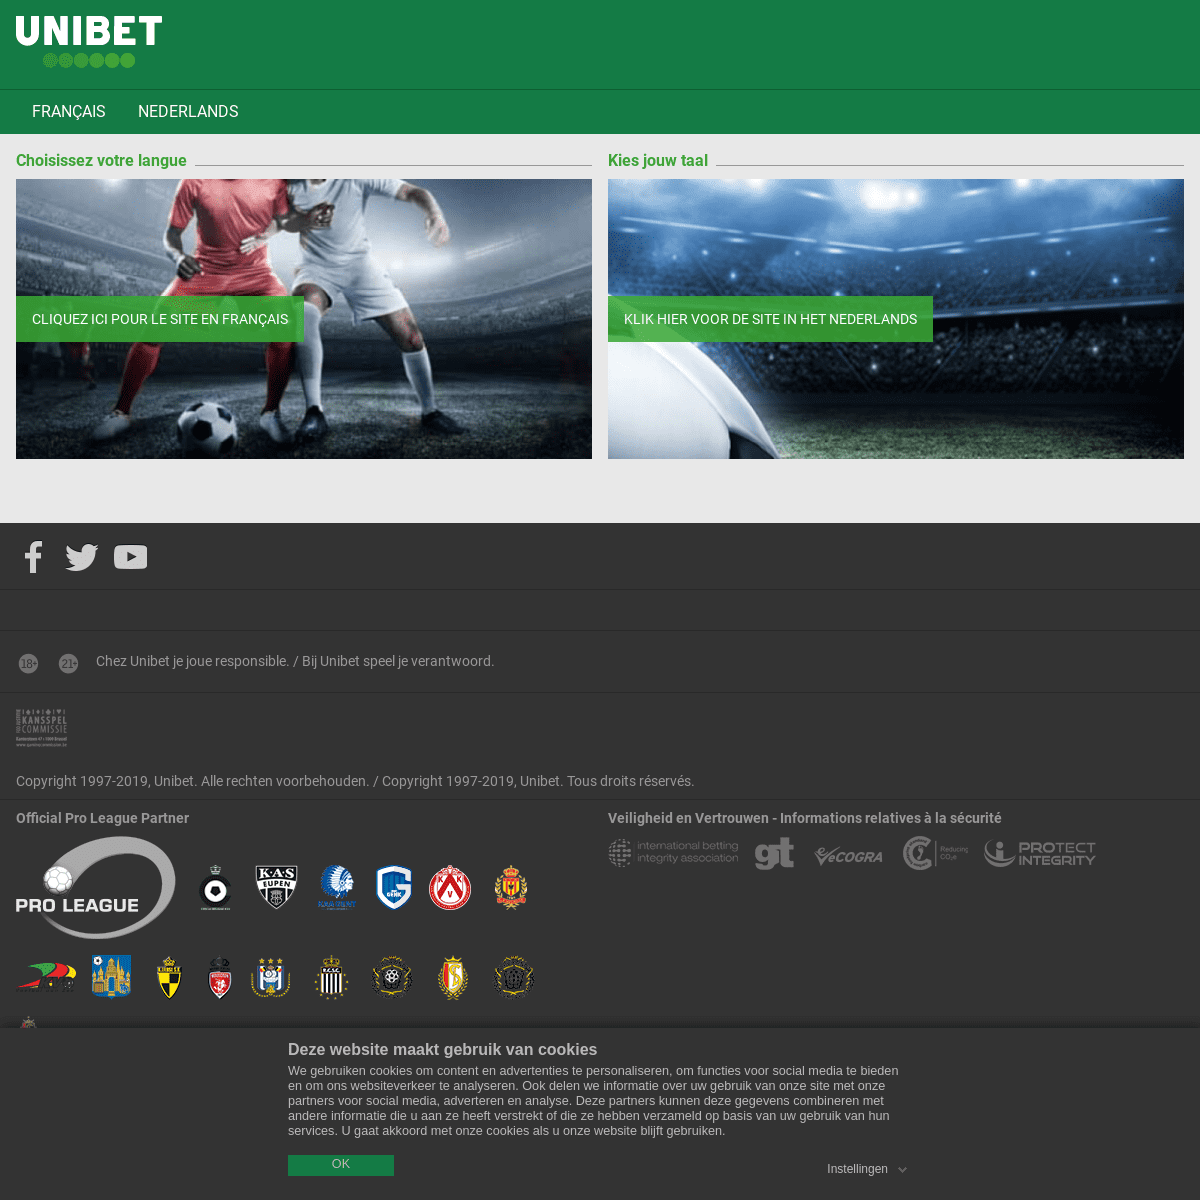 A complete backup of unibet.be